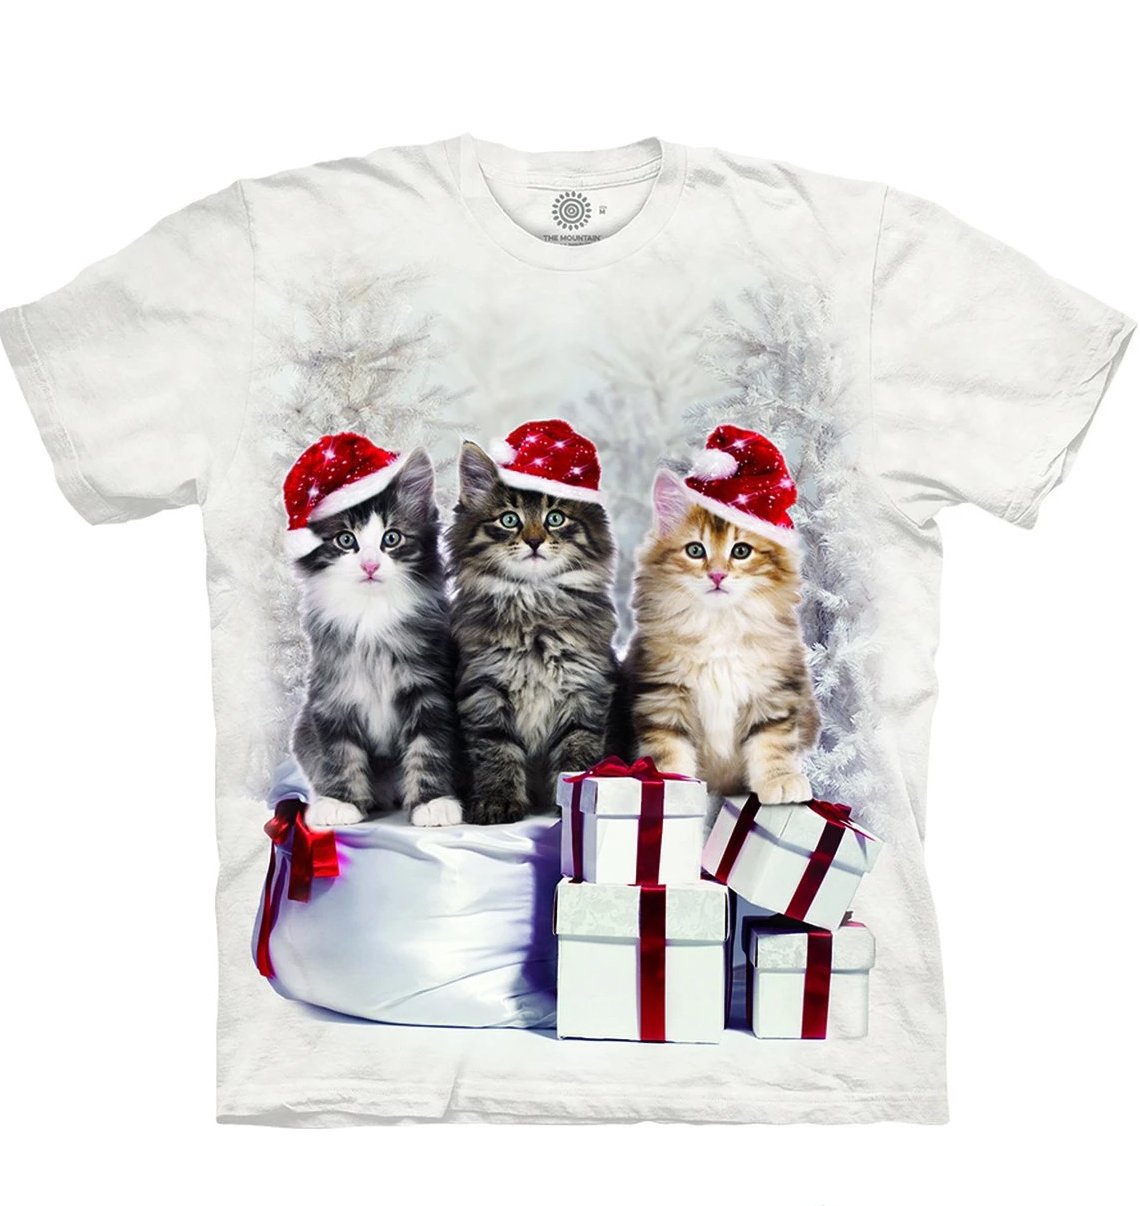 Presents Cats - The Mountain - 3D Animal T-Shirt